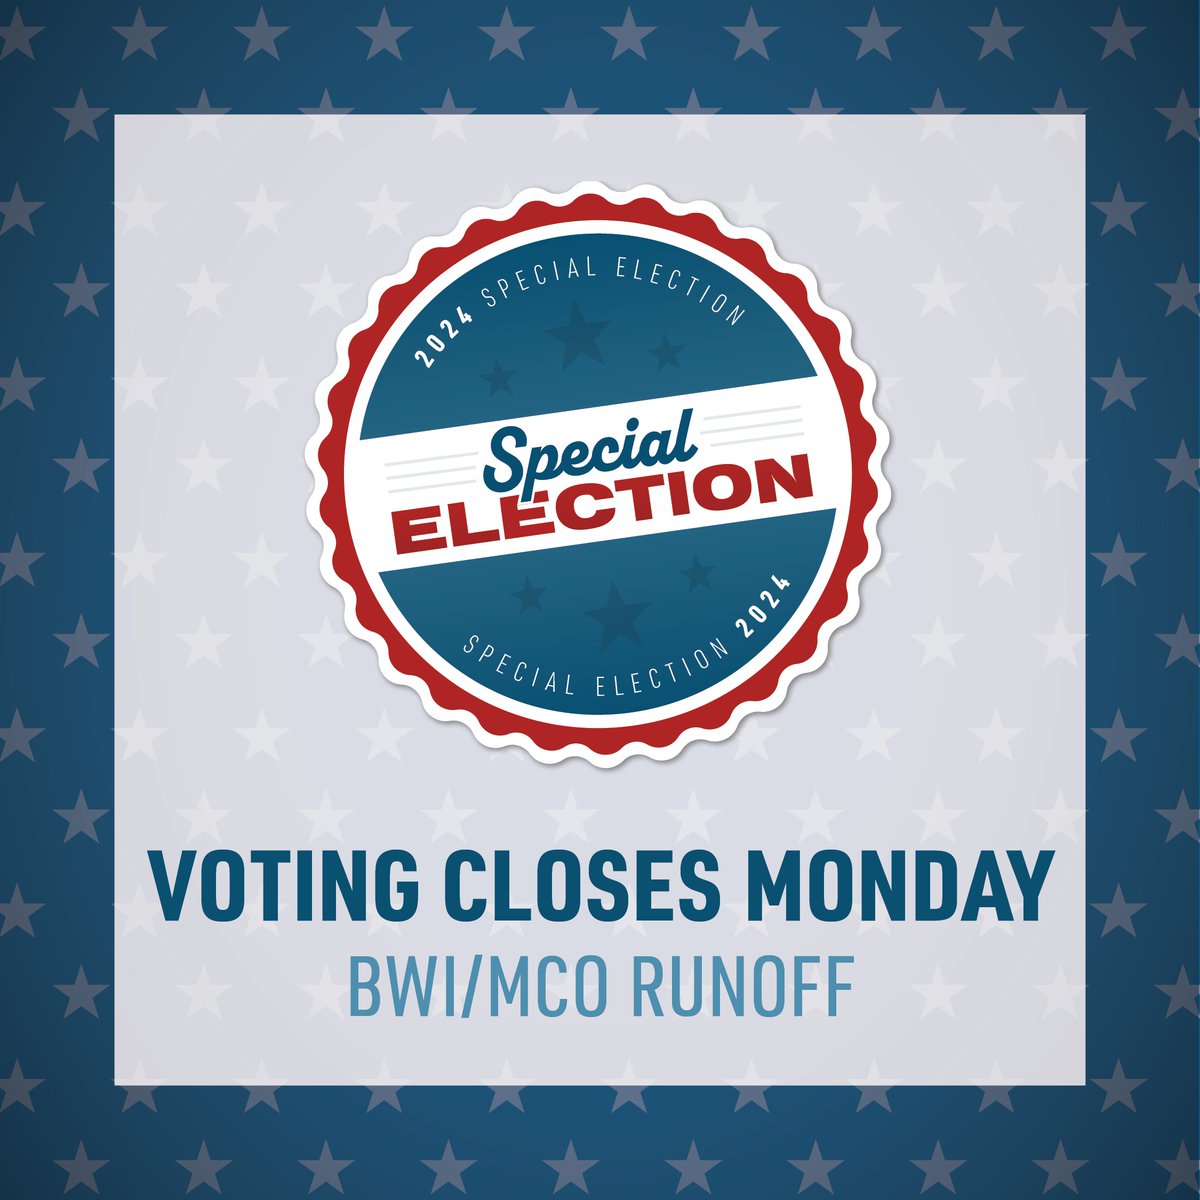 Voting for BWI and MCO's runoff election closes tomorrow at 1200 CT. If you've yet to cast your vote, visit swapa.org and click on the Vote Now graphic.